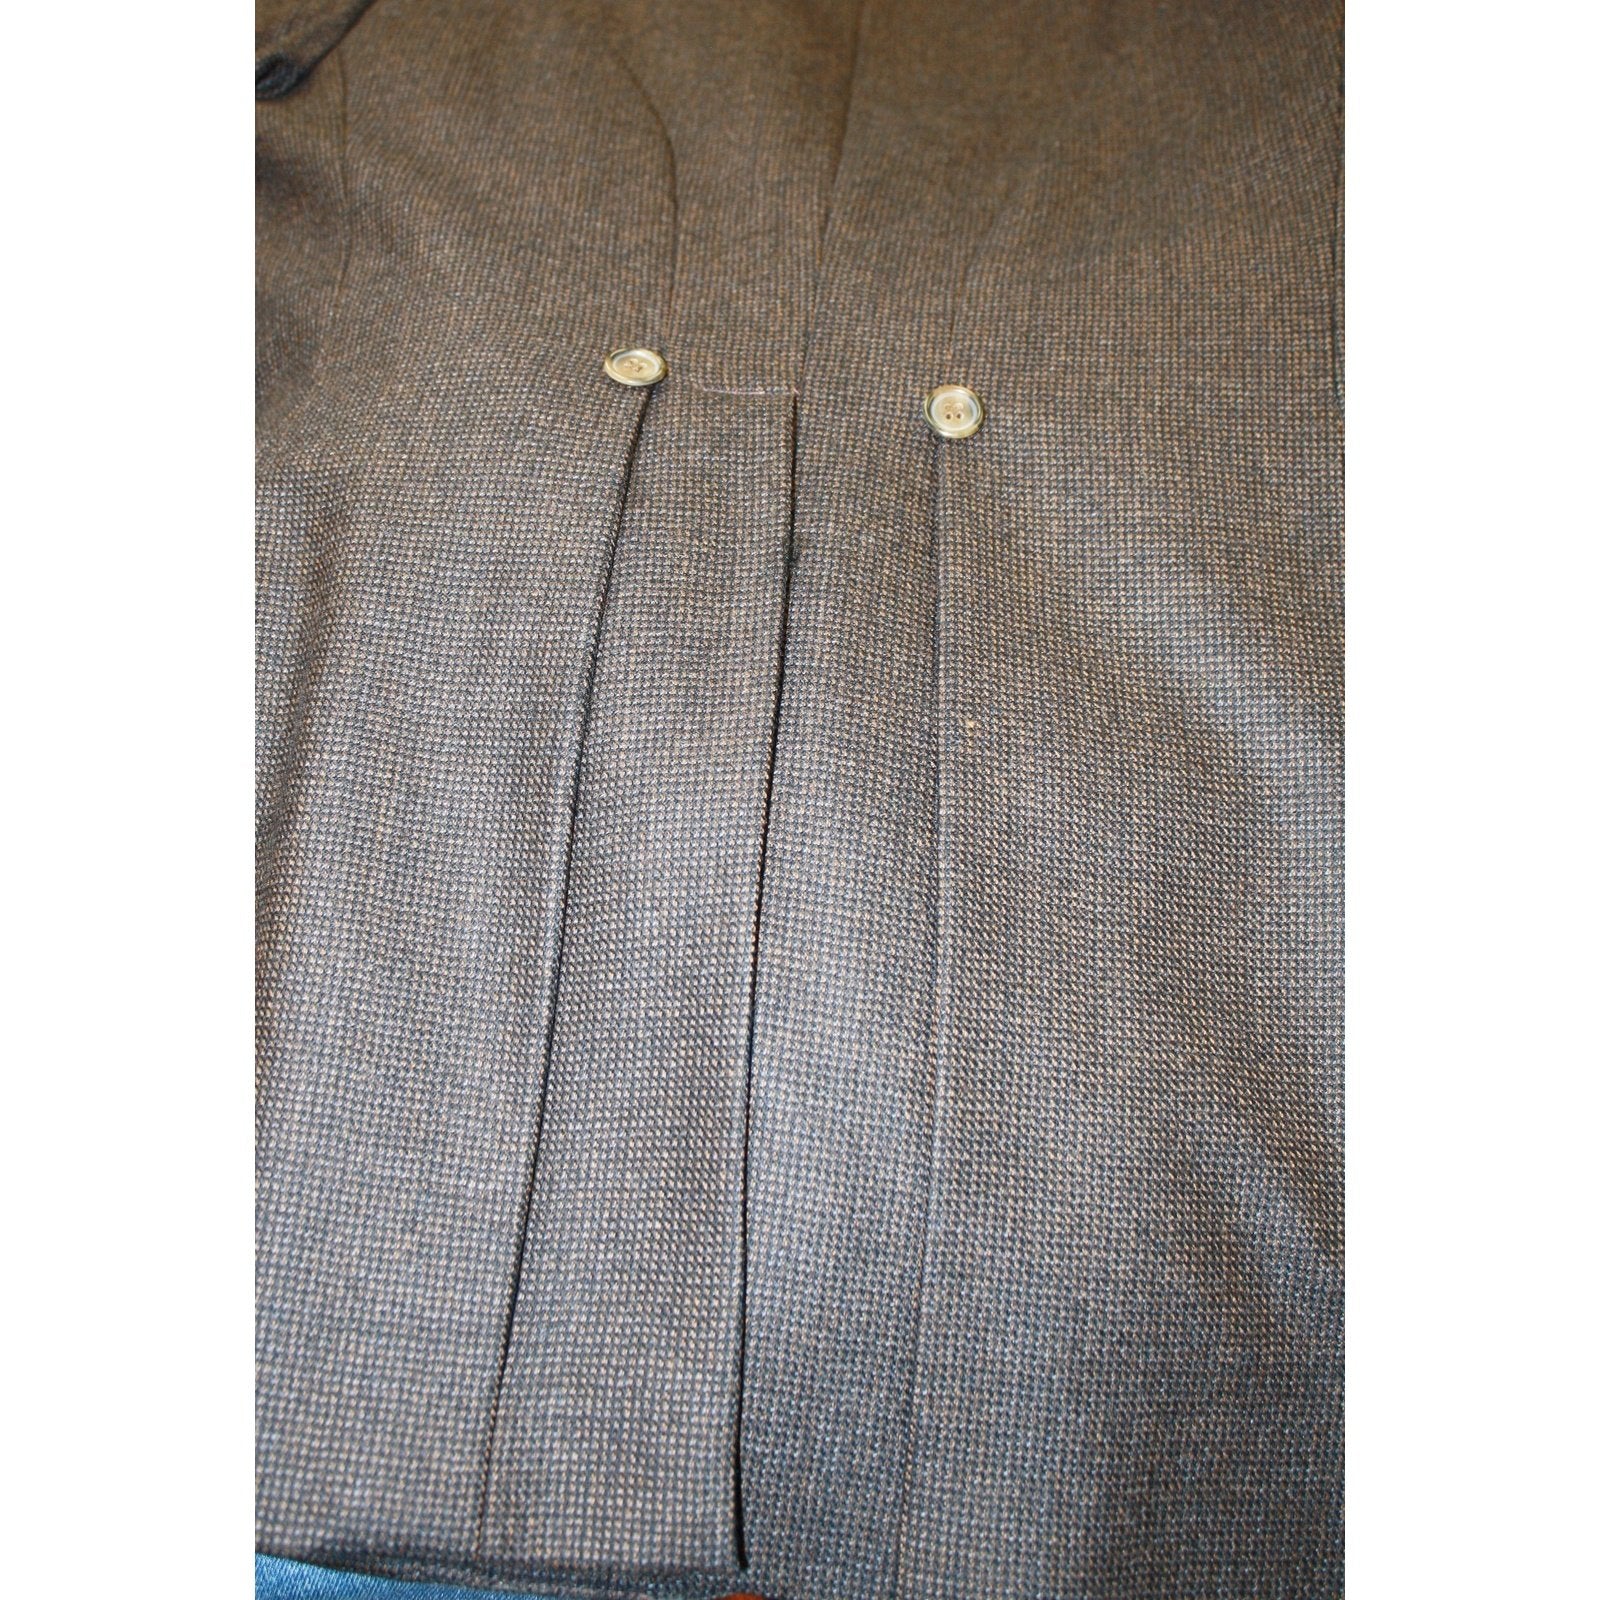 Frontier Clothing Co. Men's Town Coat Wool Brown Check - Frontier by Lawrence Scott